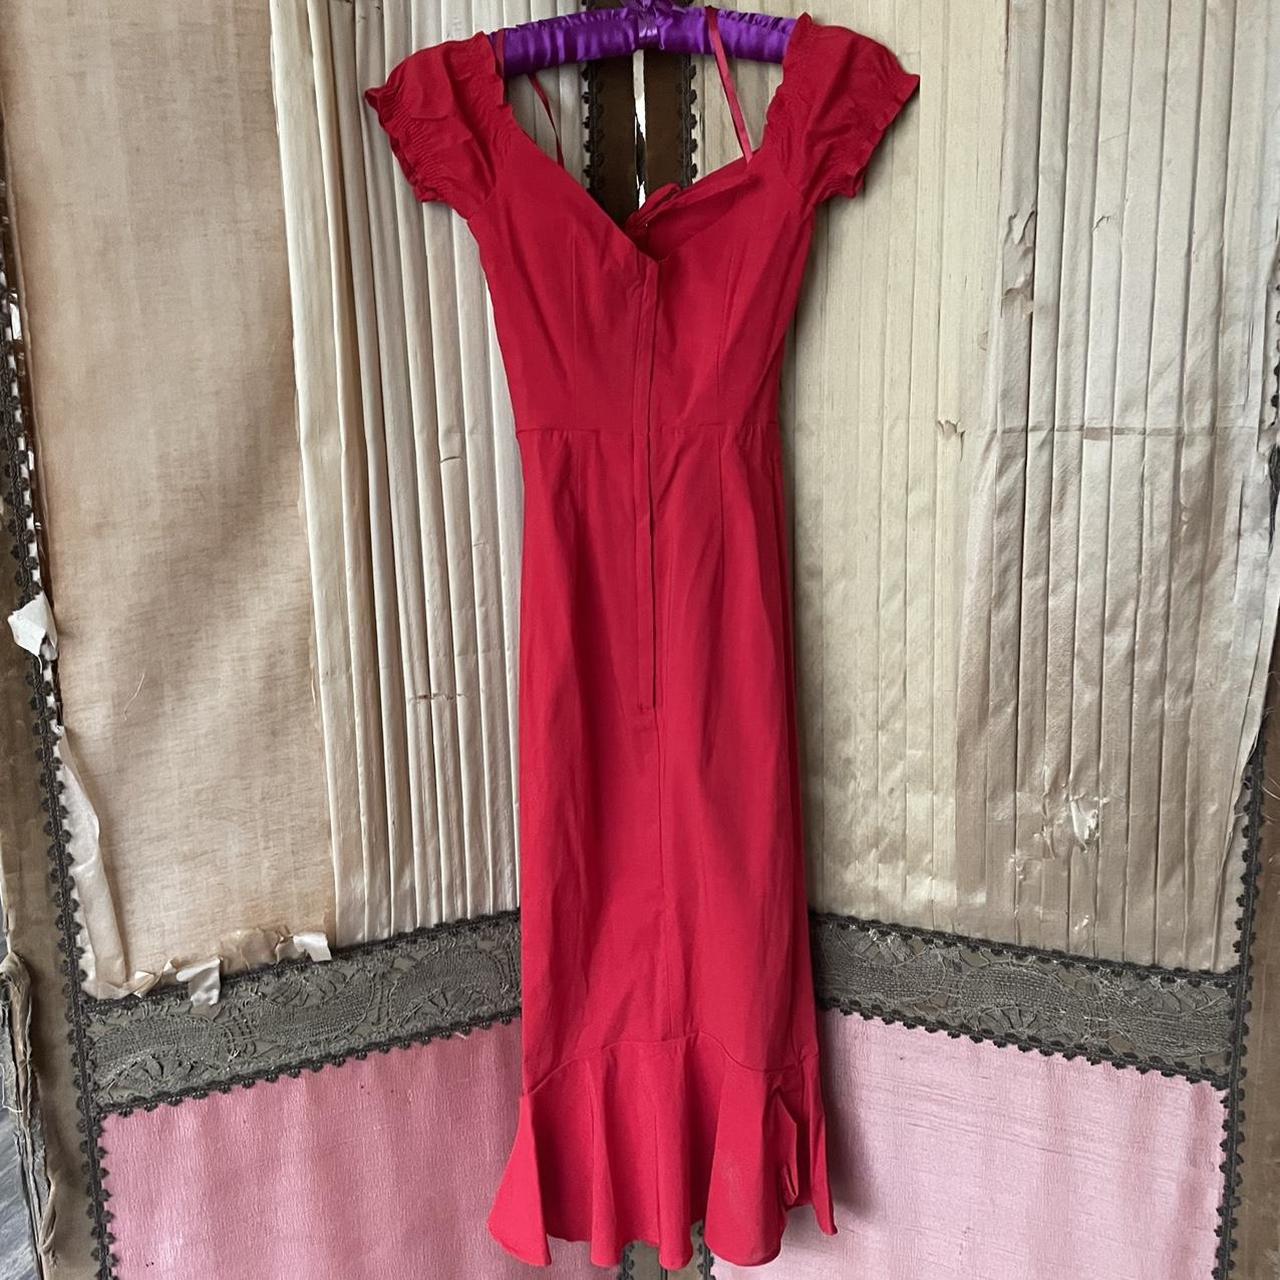 Product Image 3 - Collectif Red fishtail dress. Only